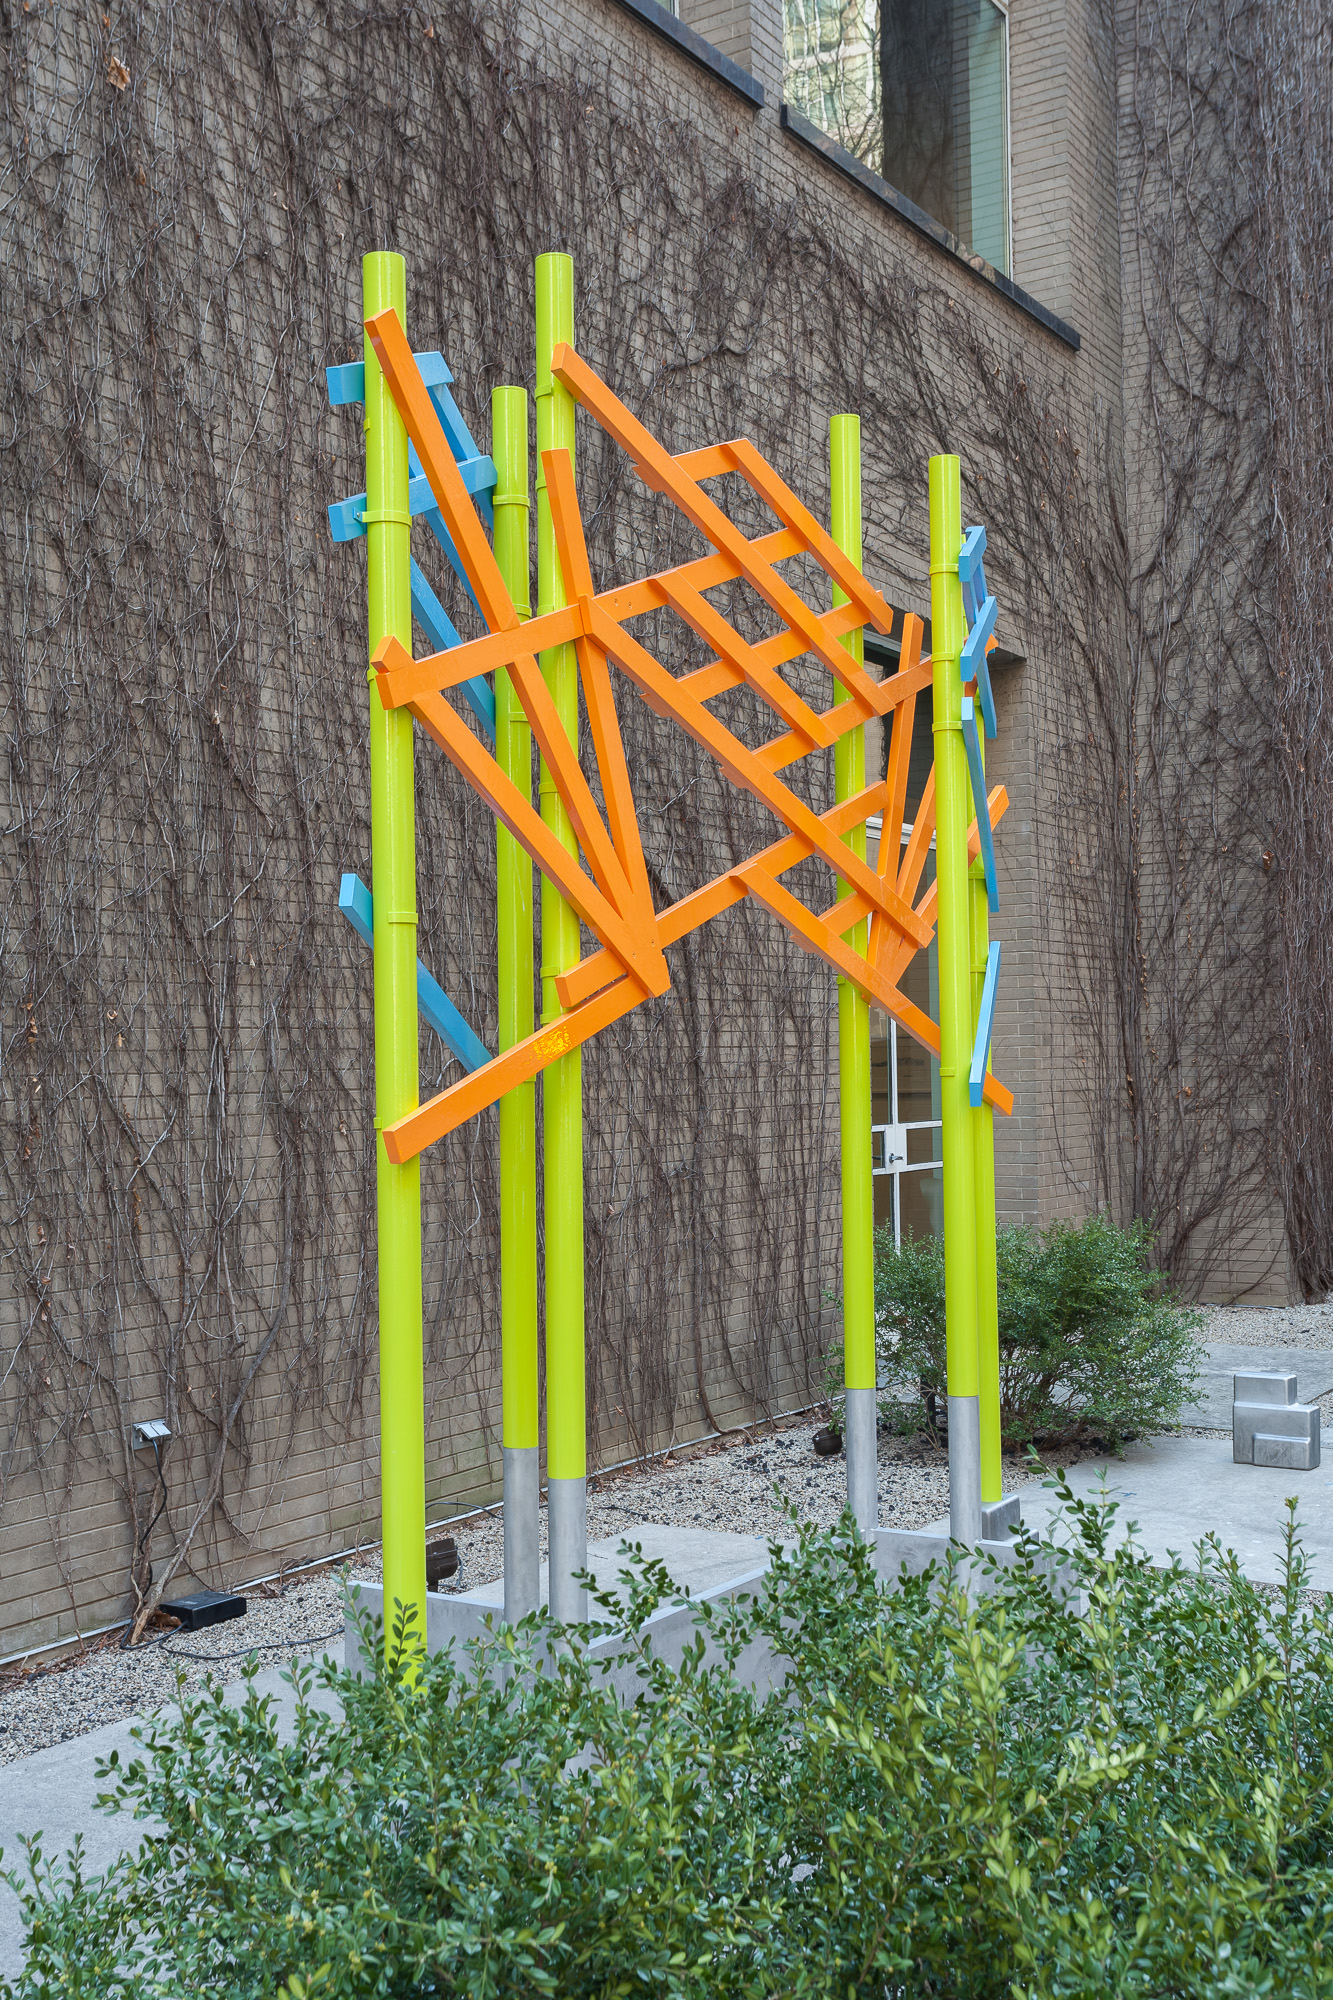 A large shrub in front of six bright green poles attached to the ground with cast metal bases. The green poles are interconnected through bright orange and blue latticework, forming an arch or gate.